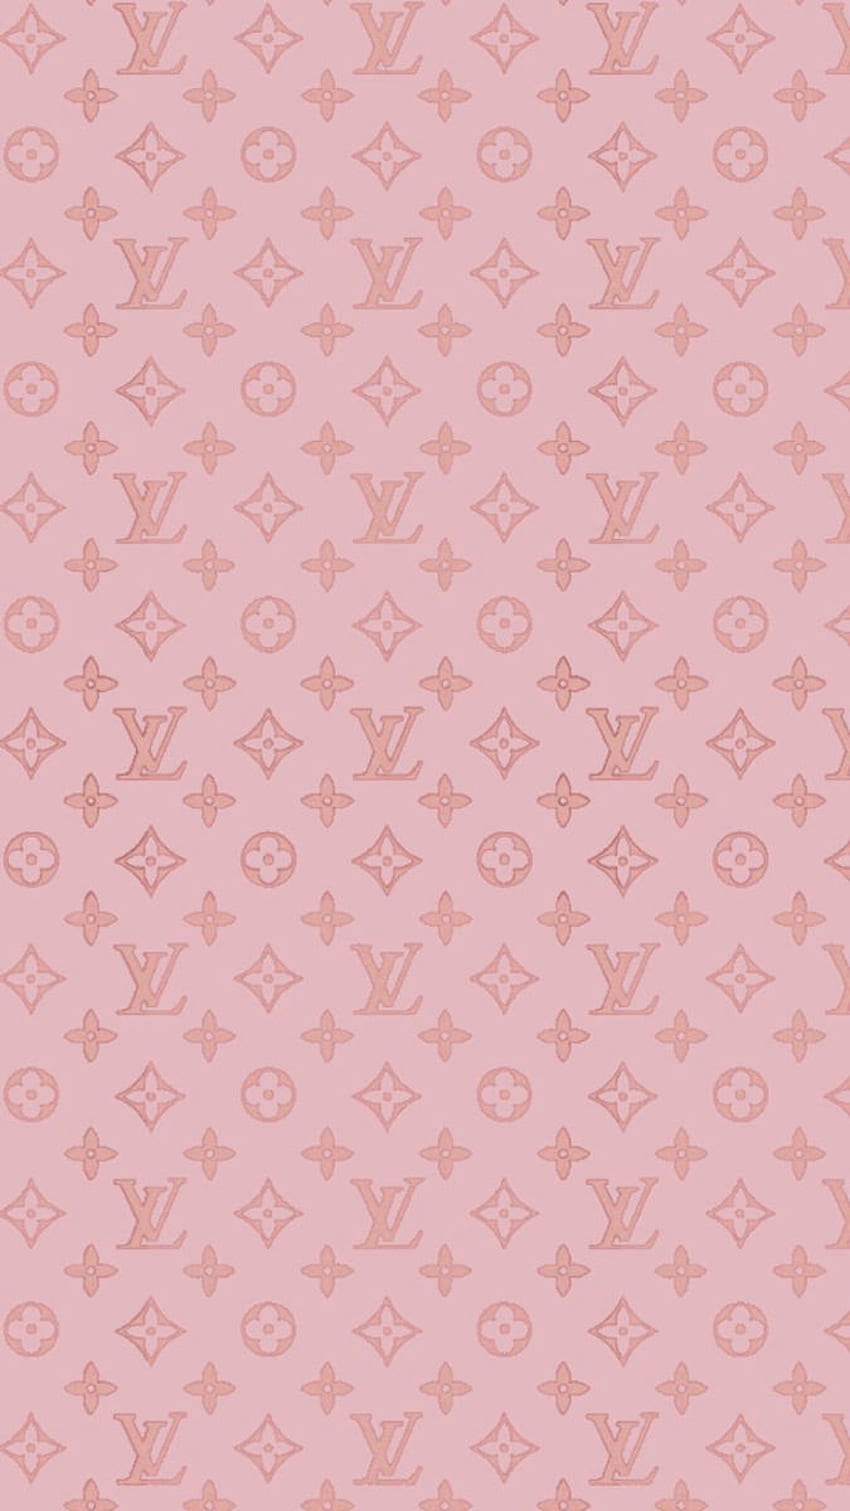 Louis Vuitton iPhone Wallpaper with high-resolution 1080x1920 pixel. You can use this wallpaper for your iPhone 5, 6, 7, 8, X, XS, XR backgrounds, Mobile Screensaver, or iPad Lock Screen - Louis Vuitton